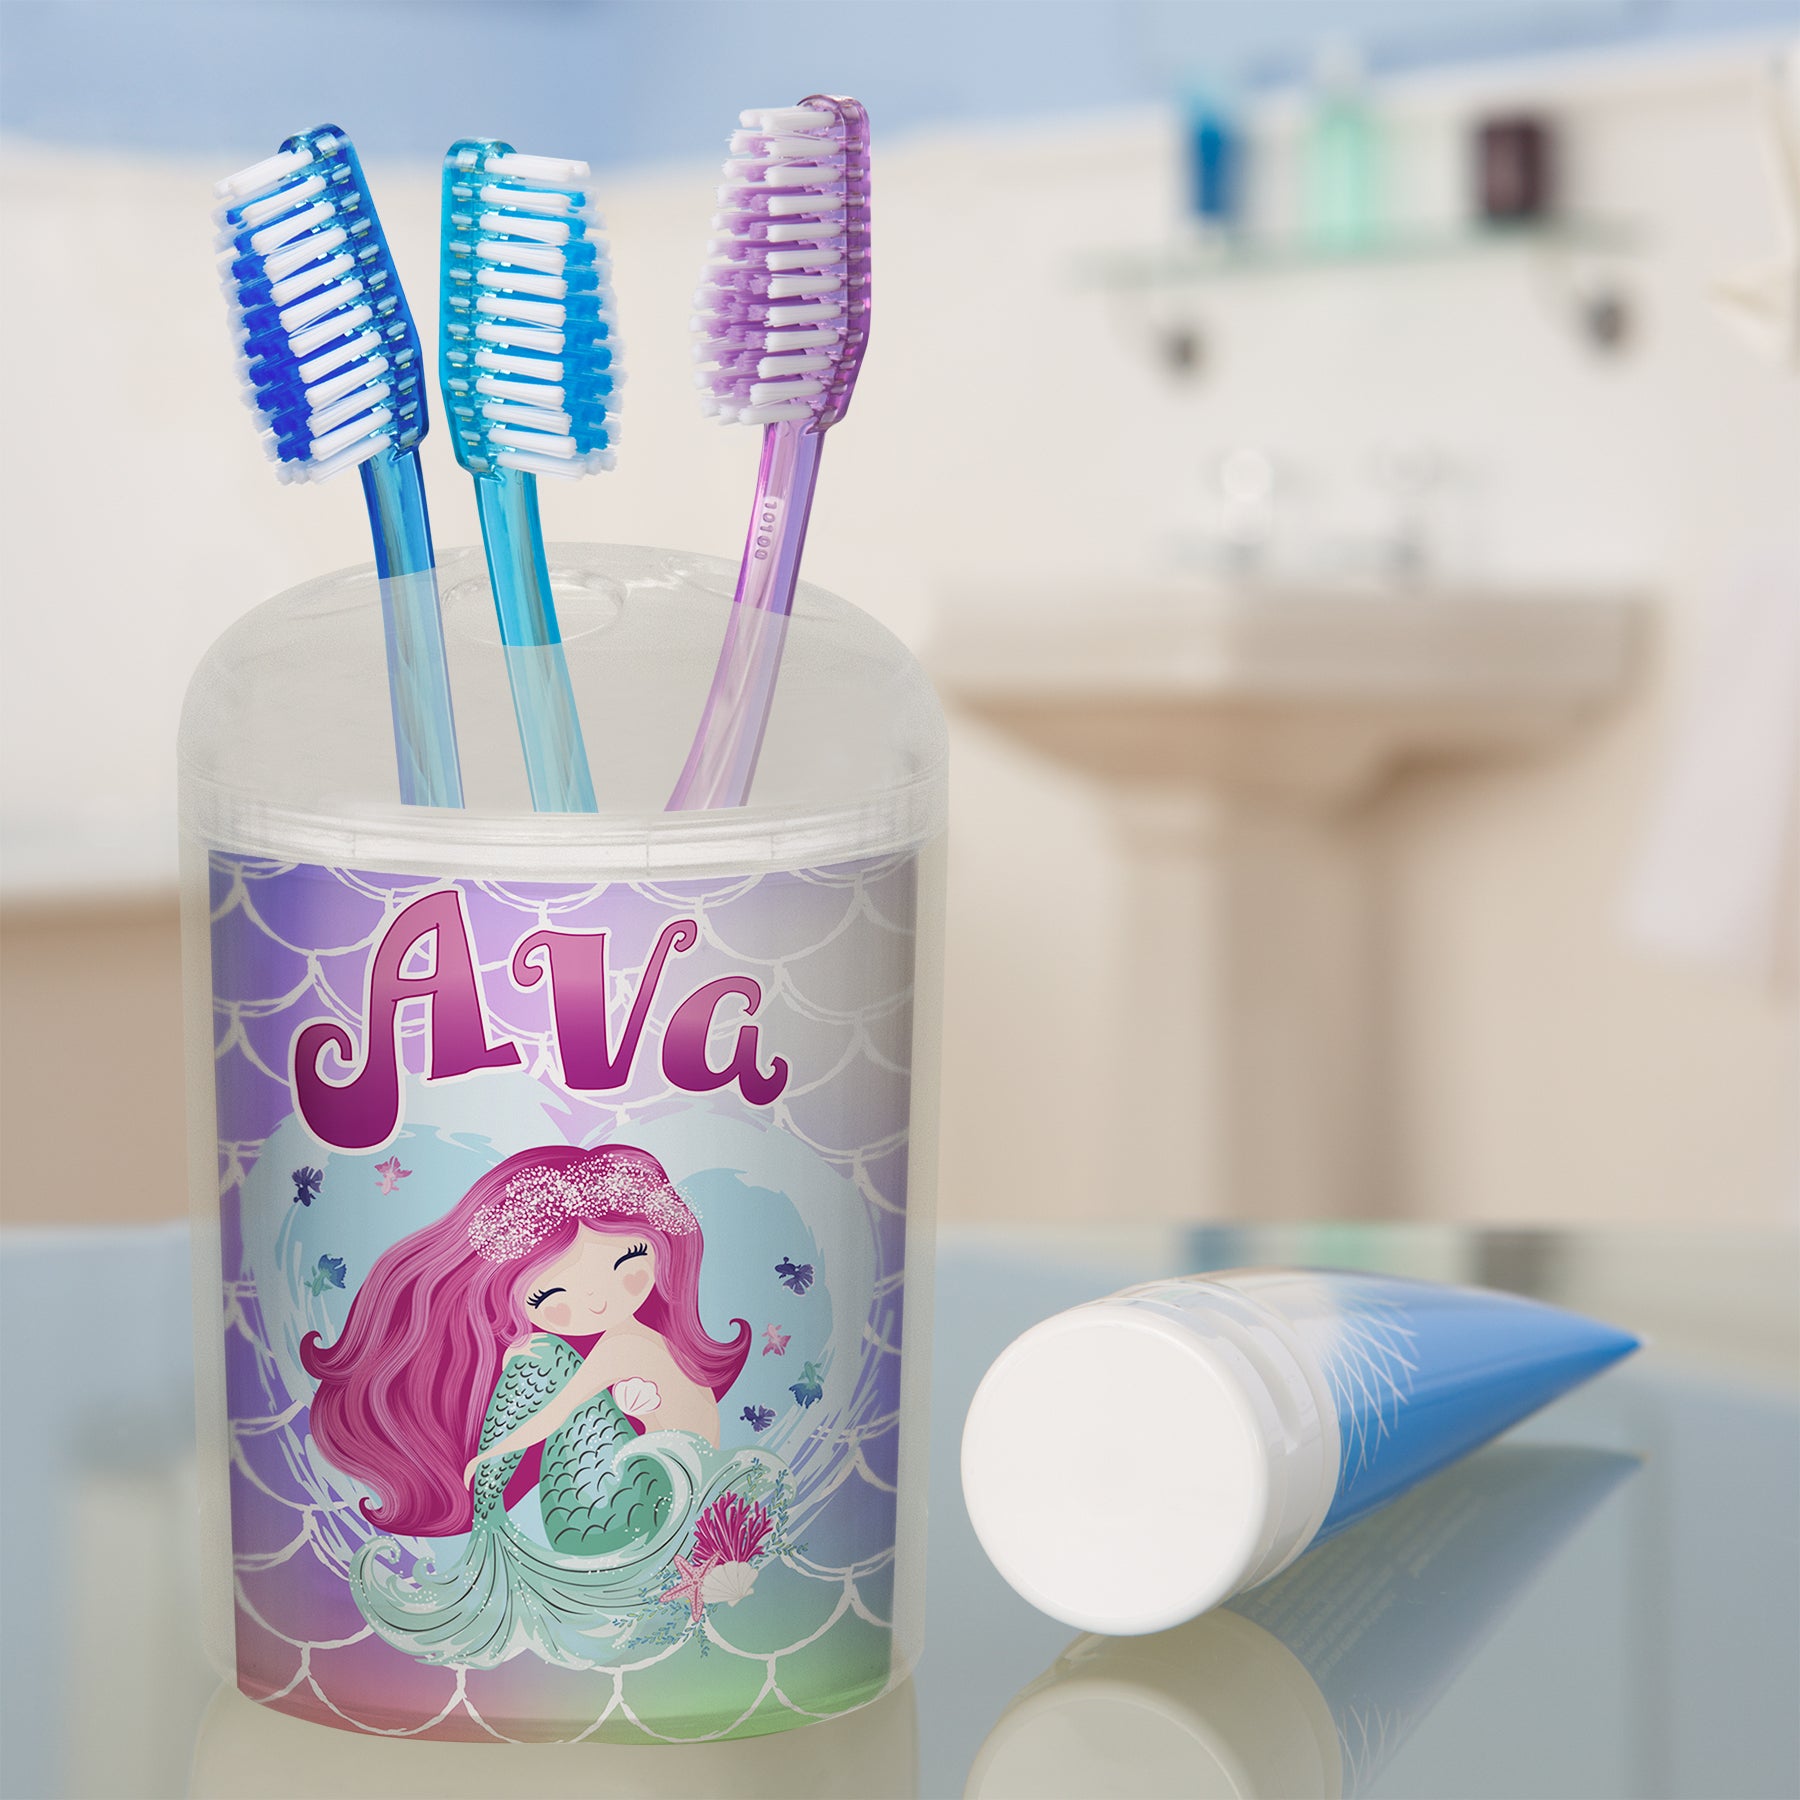 Create Your Own Toothbrush Holder